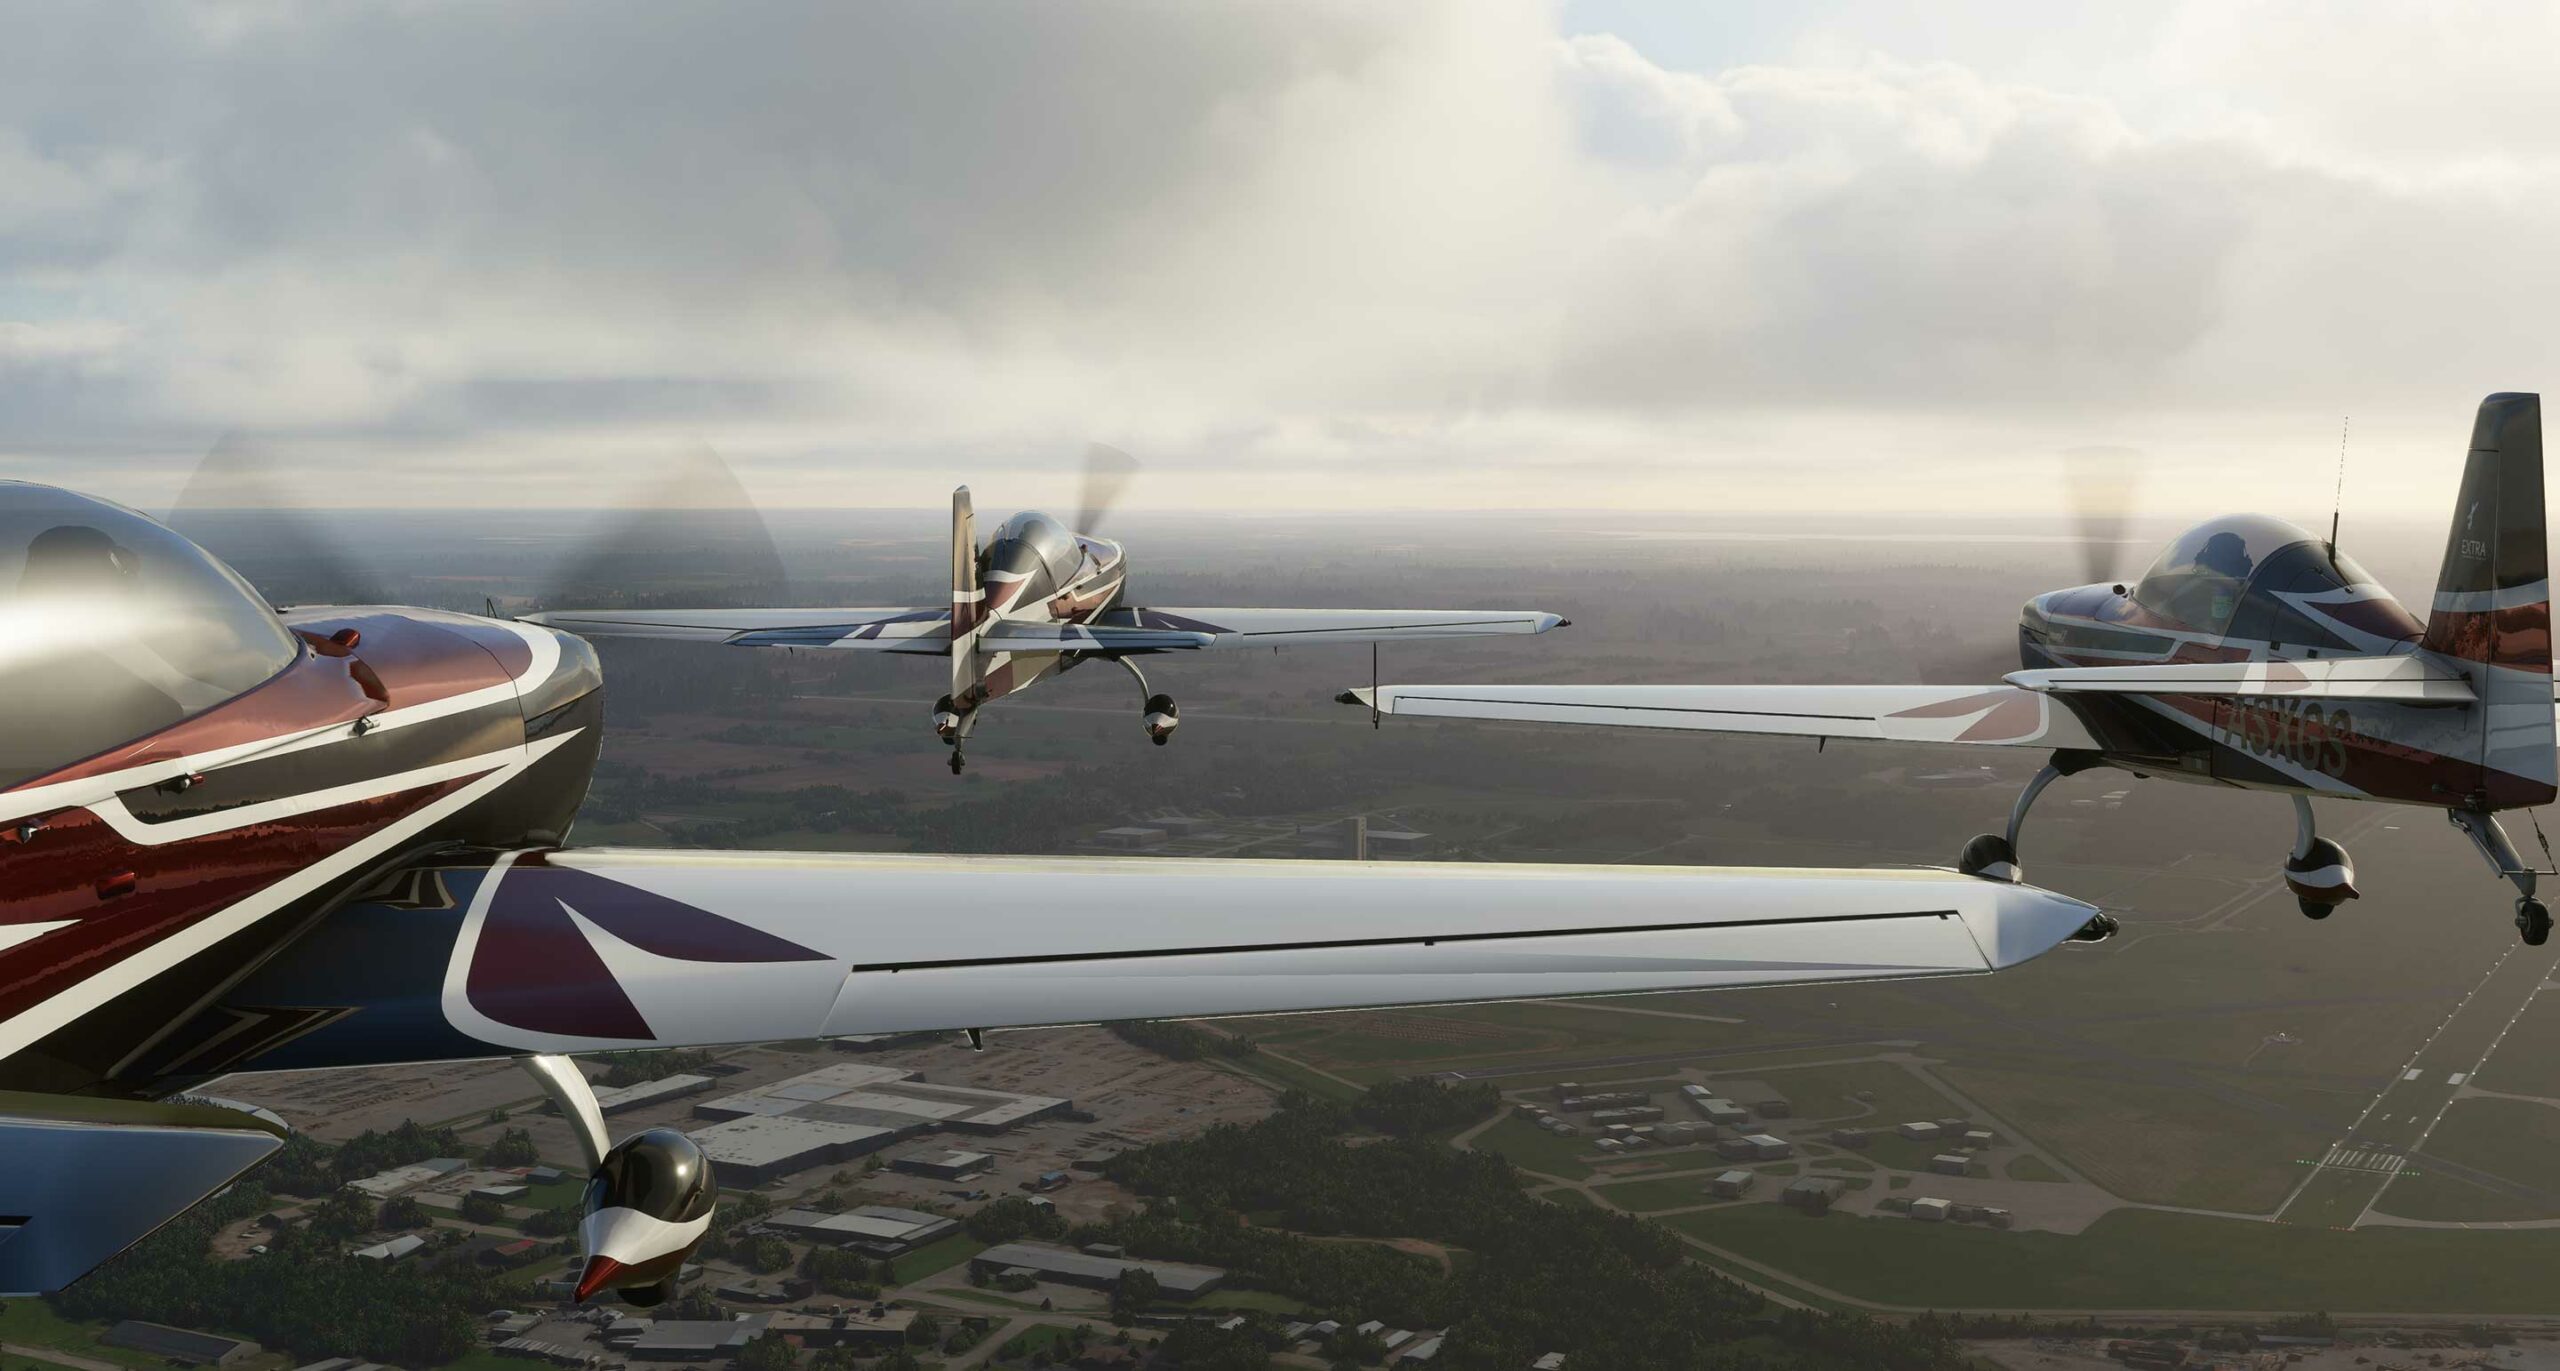 Microsoft Flight Simulator 2020 lets you take to the skies with